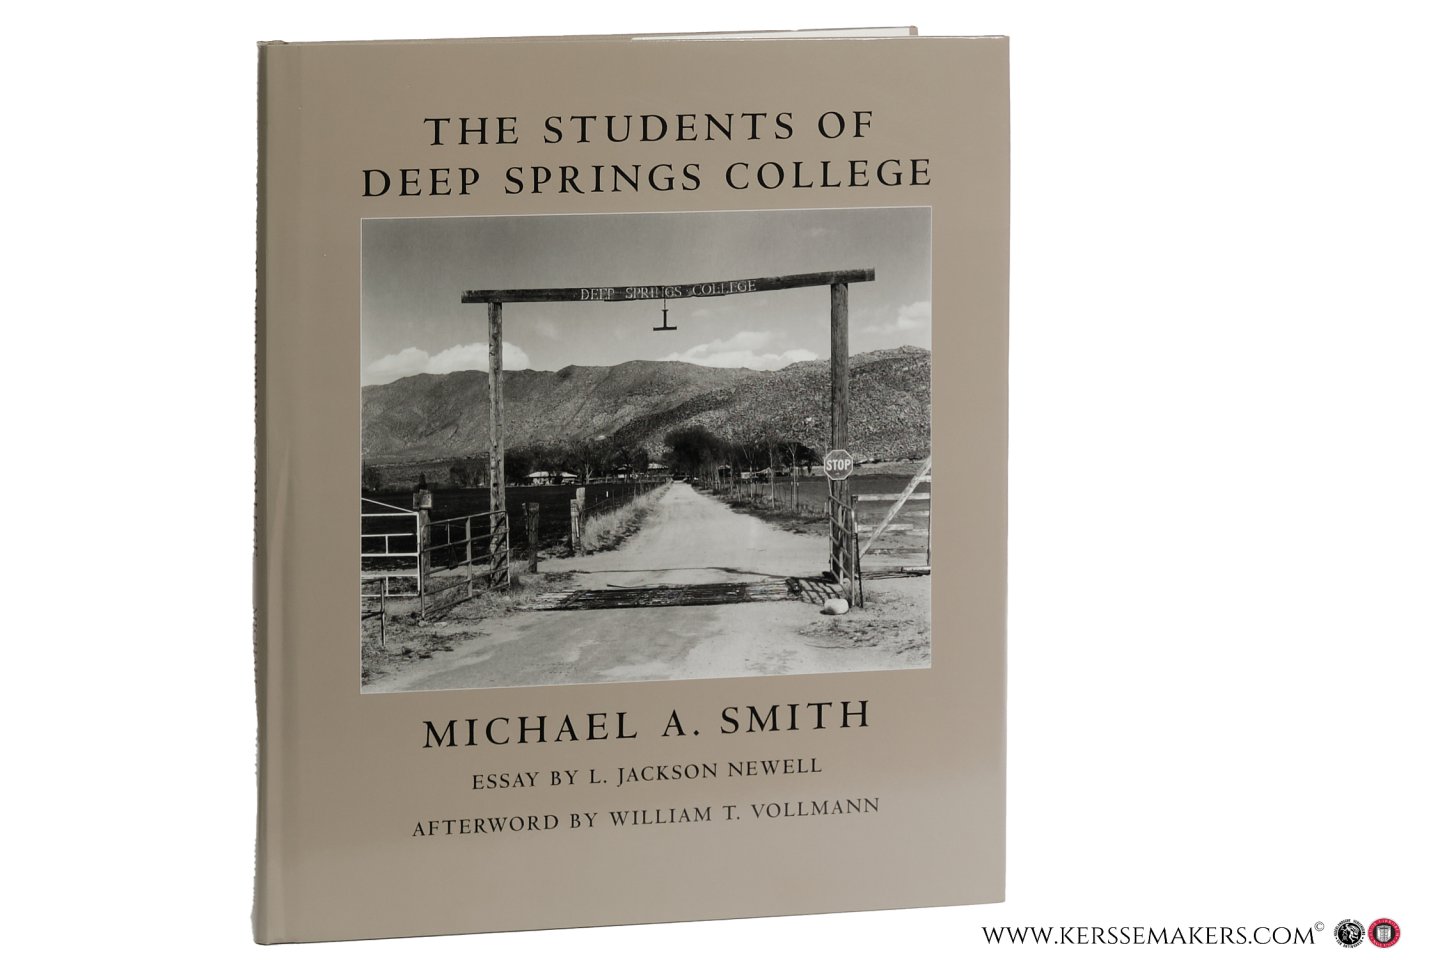 Newell, L. Jackson. - The Students of Deep Springs College. Photographs by Michael A. Smith. Afterword by William T. Vollmann.